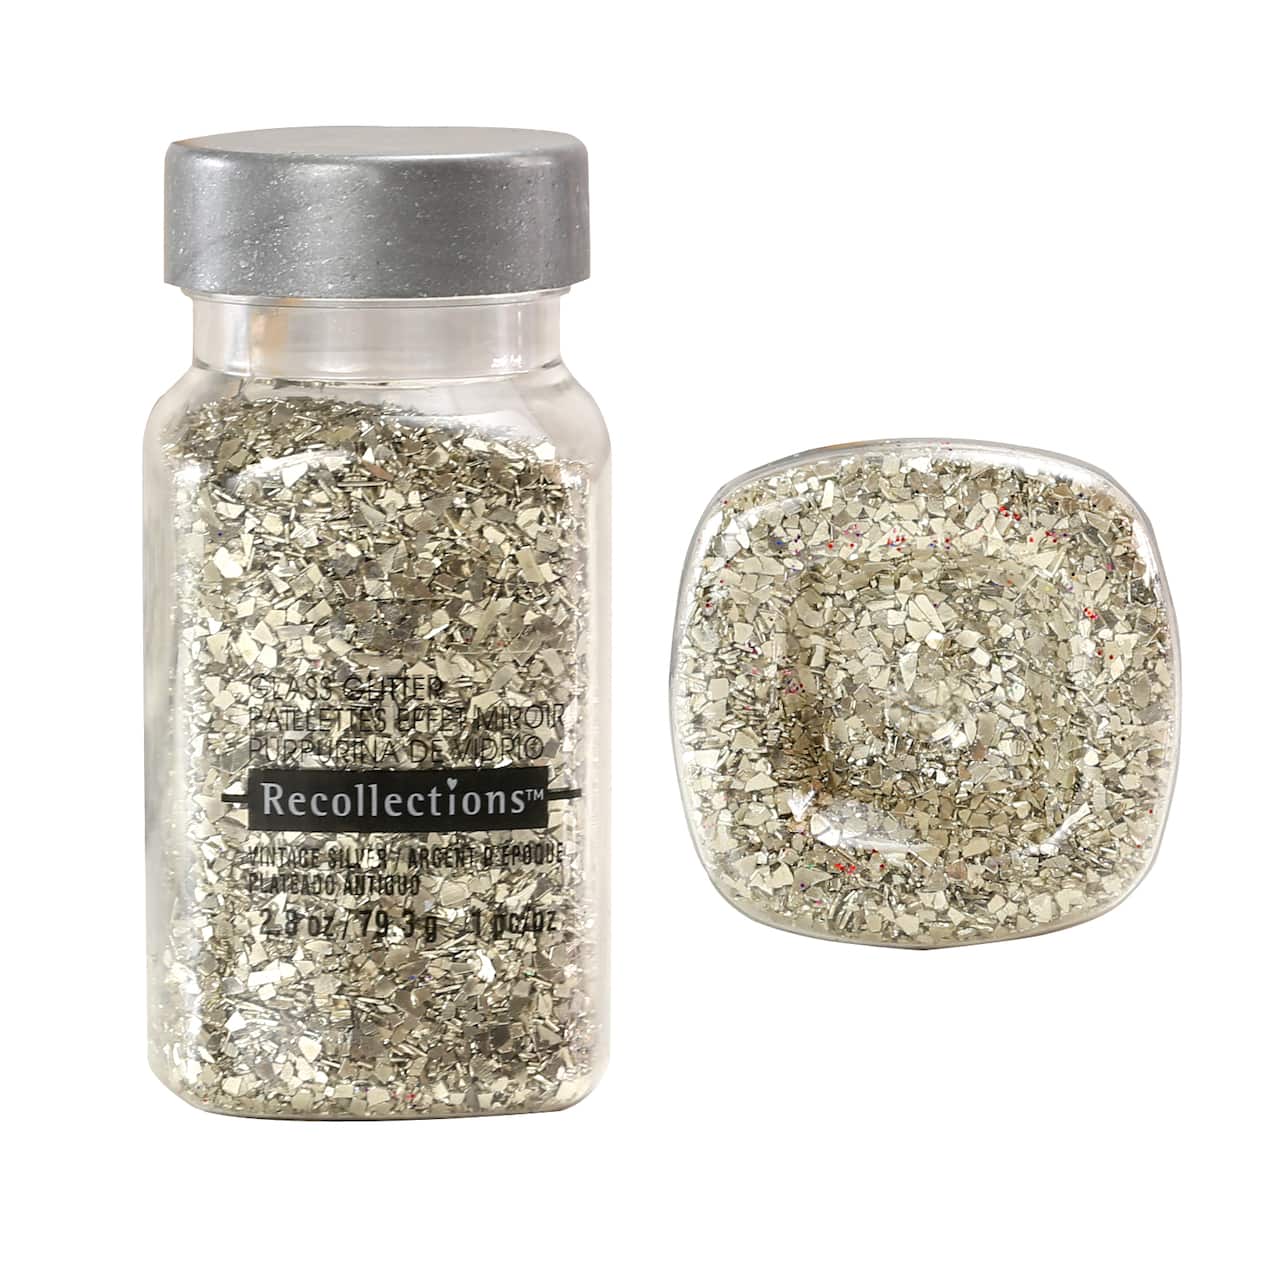 Recollections Vintage Glass Silver Glitter - Each